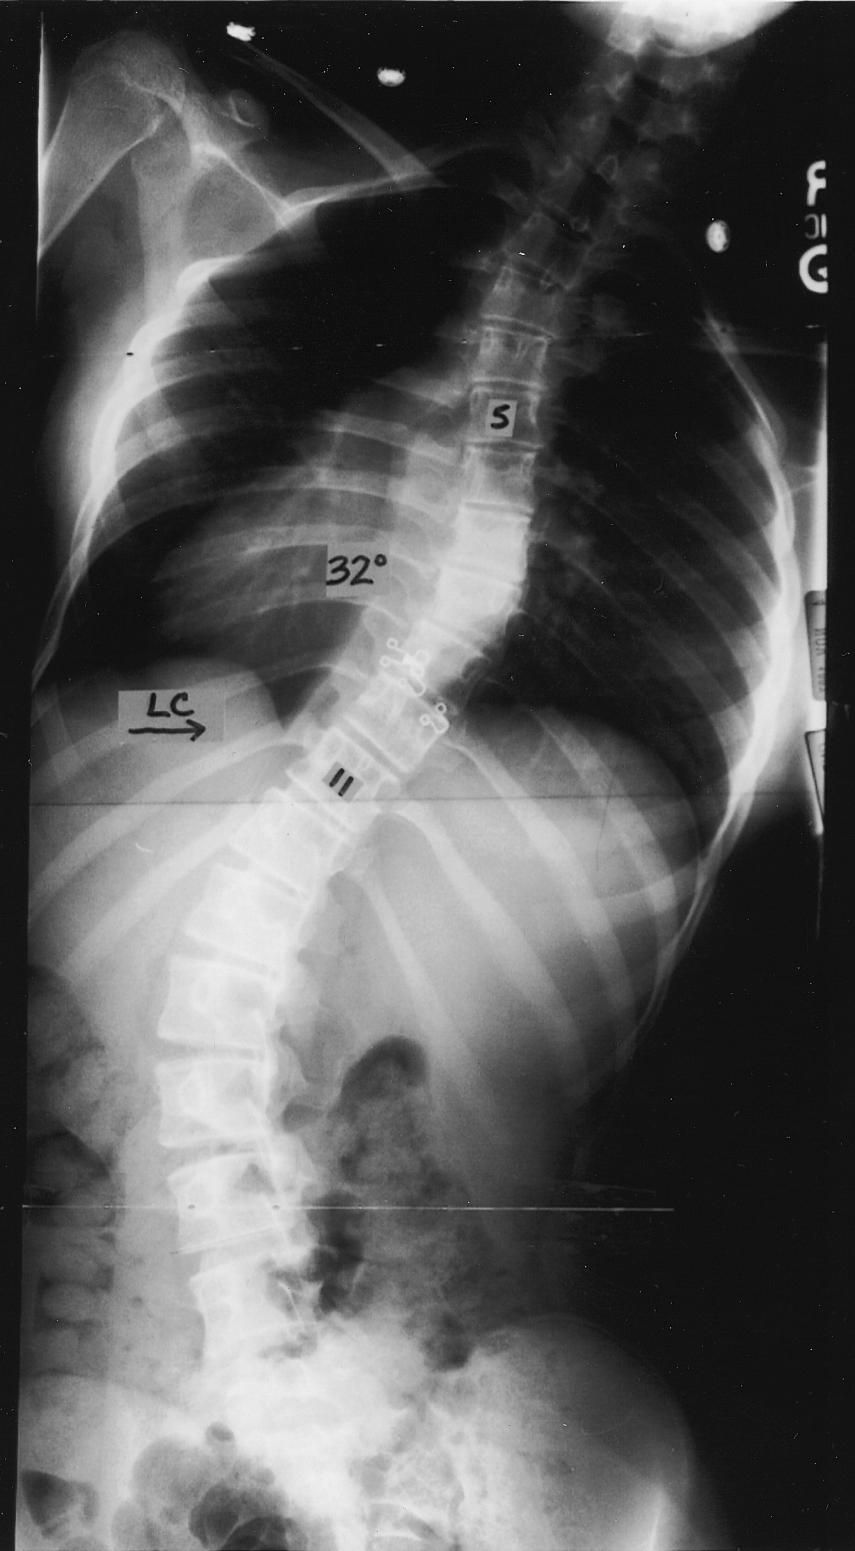 G.L.) retrospectively reviewed radiographs of 315 consecutive patients with operatively treated scoliosis to assess the prevalence of curve types in a typical surgical practice.